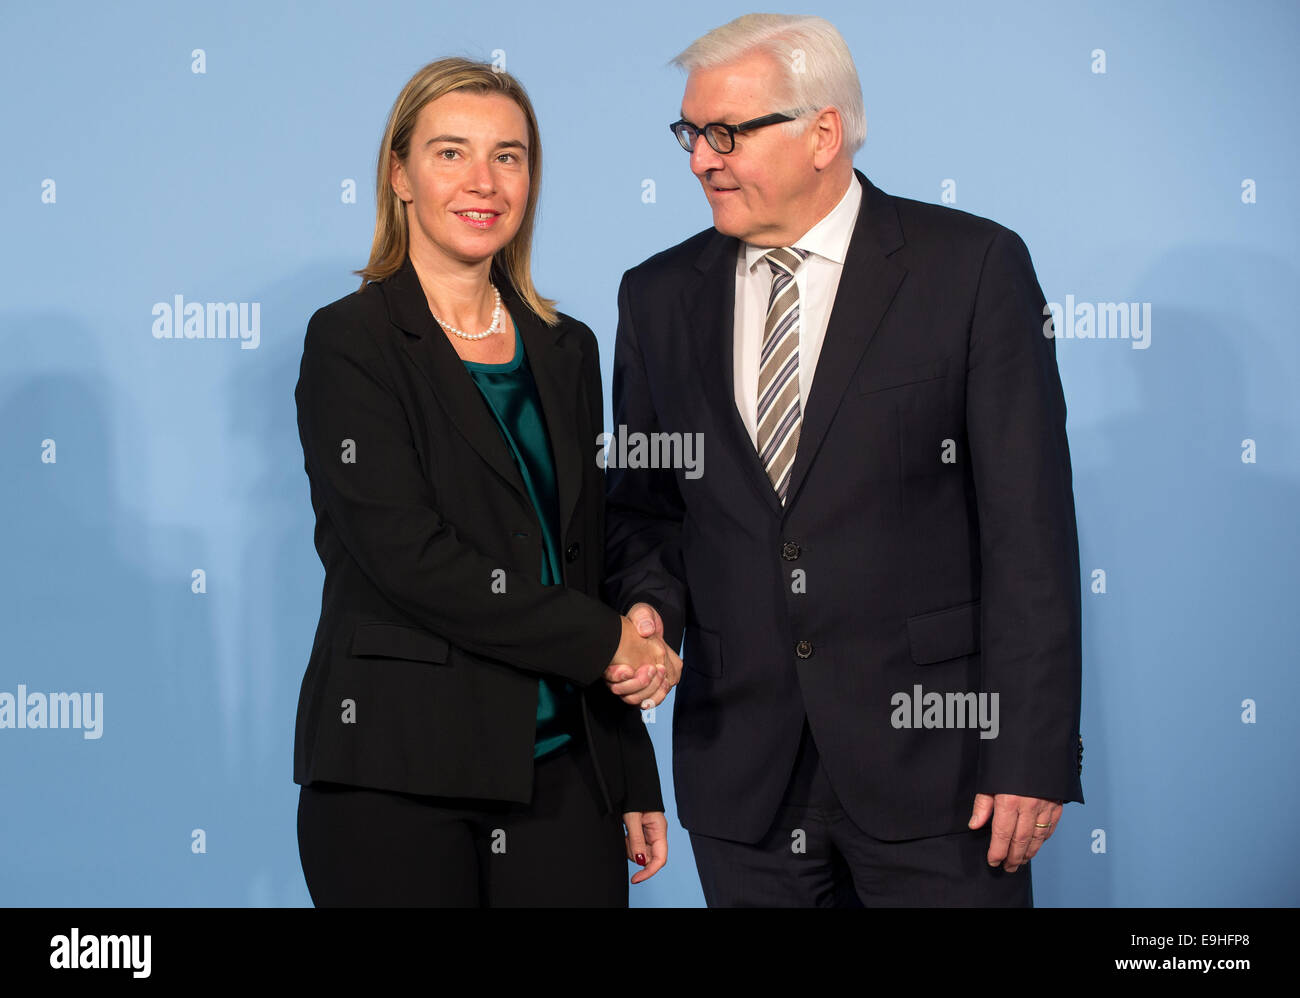 German Foreign Minister Frank-Walter Steinmeier (R) welcomes Federica Mogherini, the Italian Foreign Minister, to the conference on the current refugee situation in Syria and neighboring countries in the Foreign Office in Berlin, Germany 28 October 2014. Photo: TIM BRAKEMEIER/dpa Stock Photo